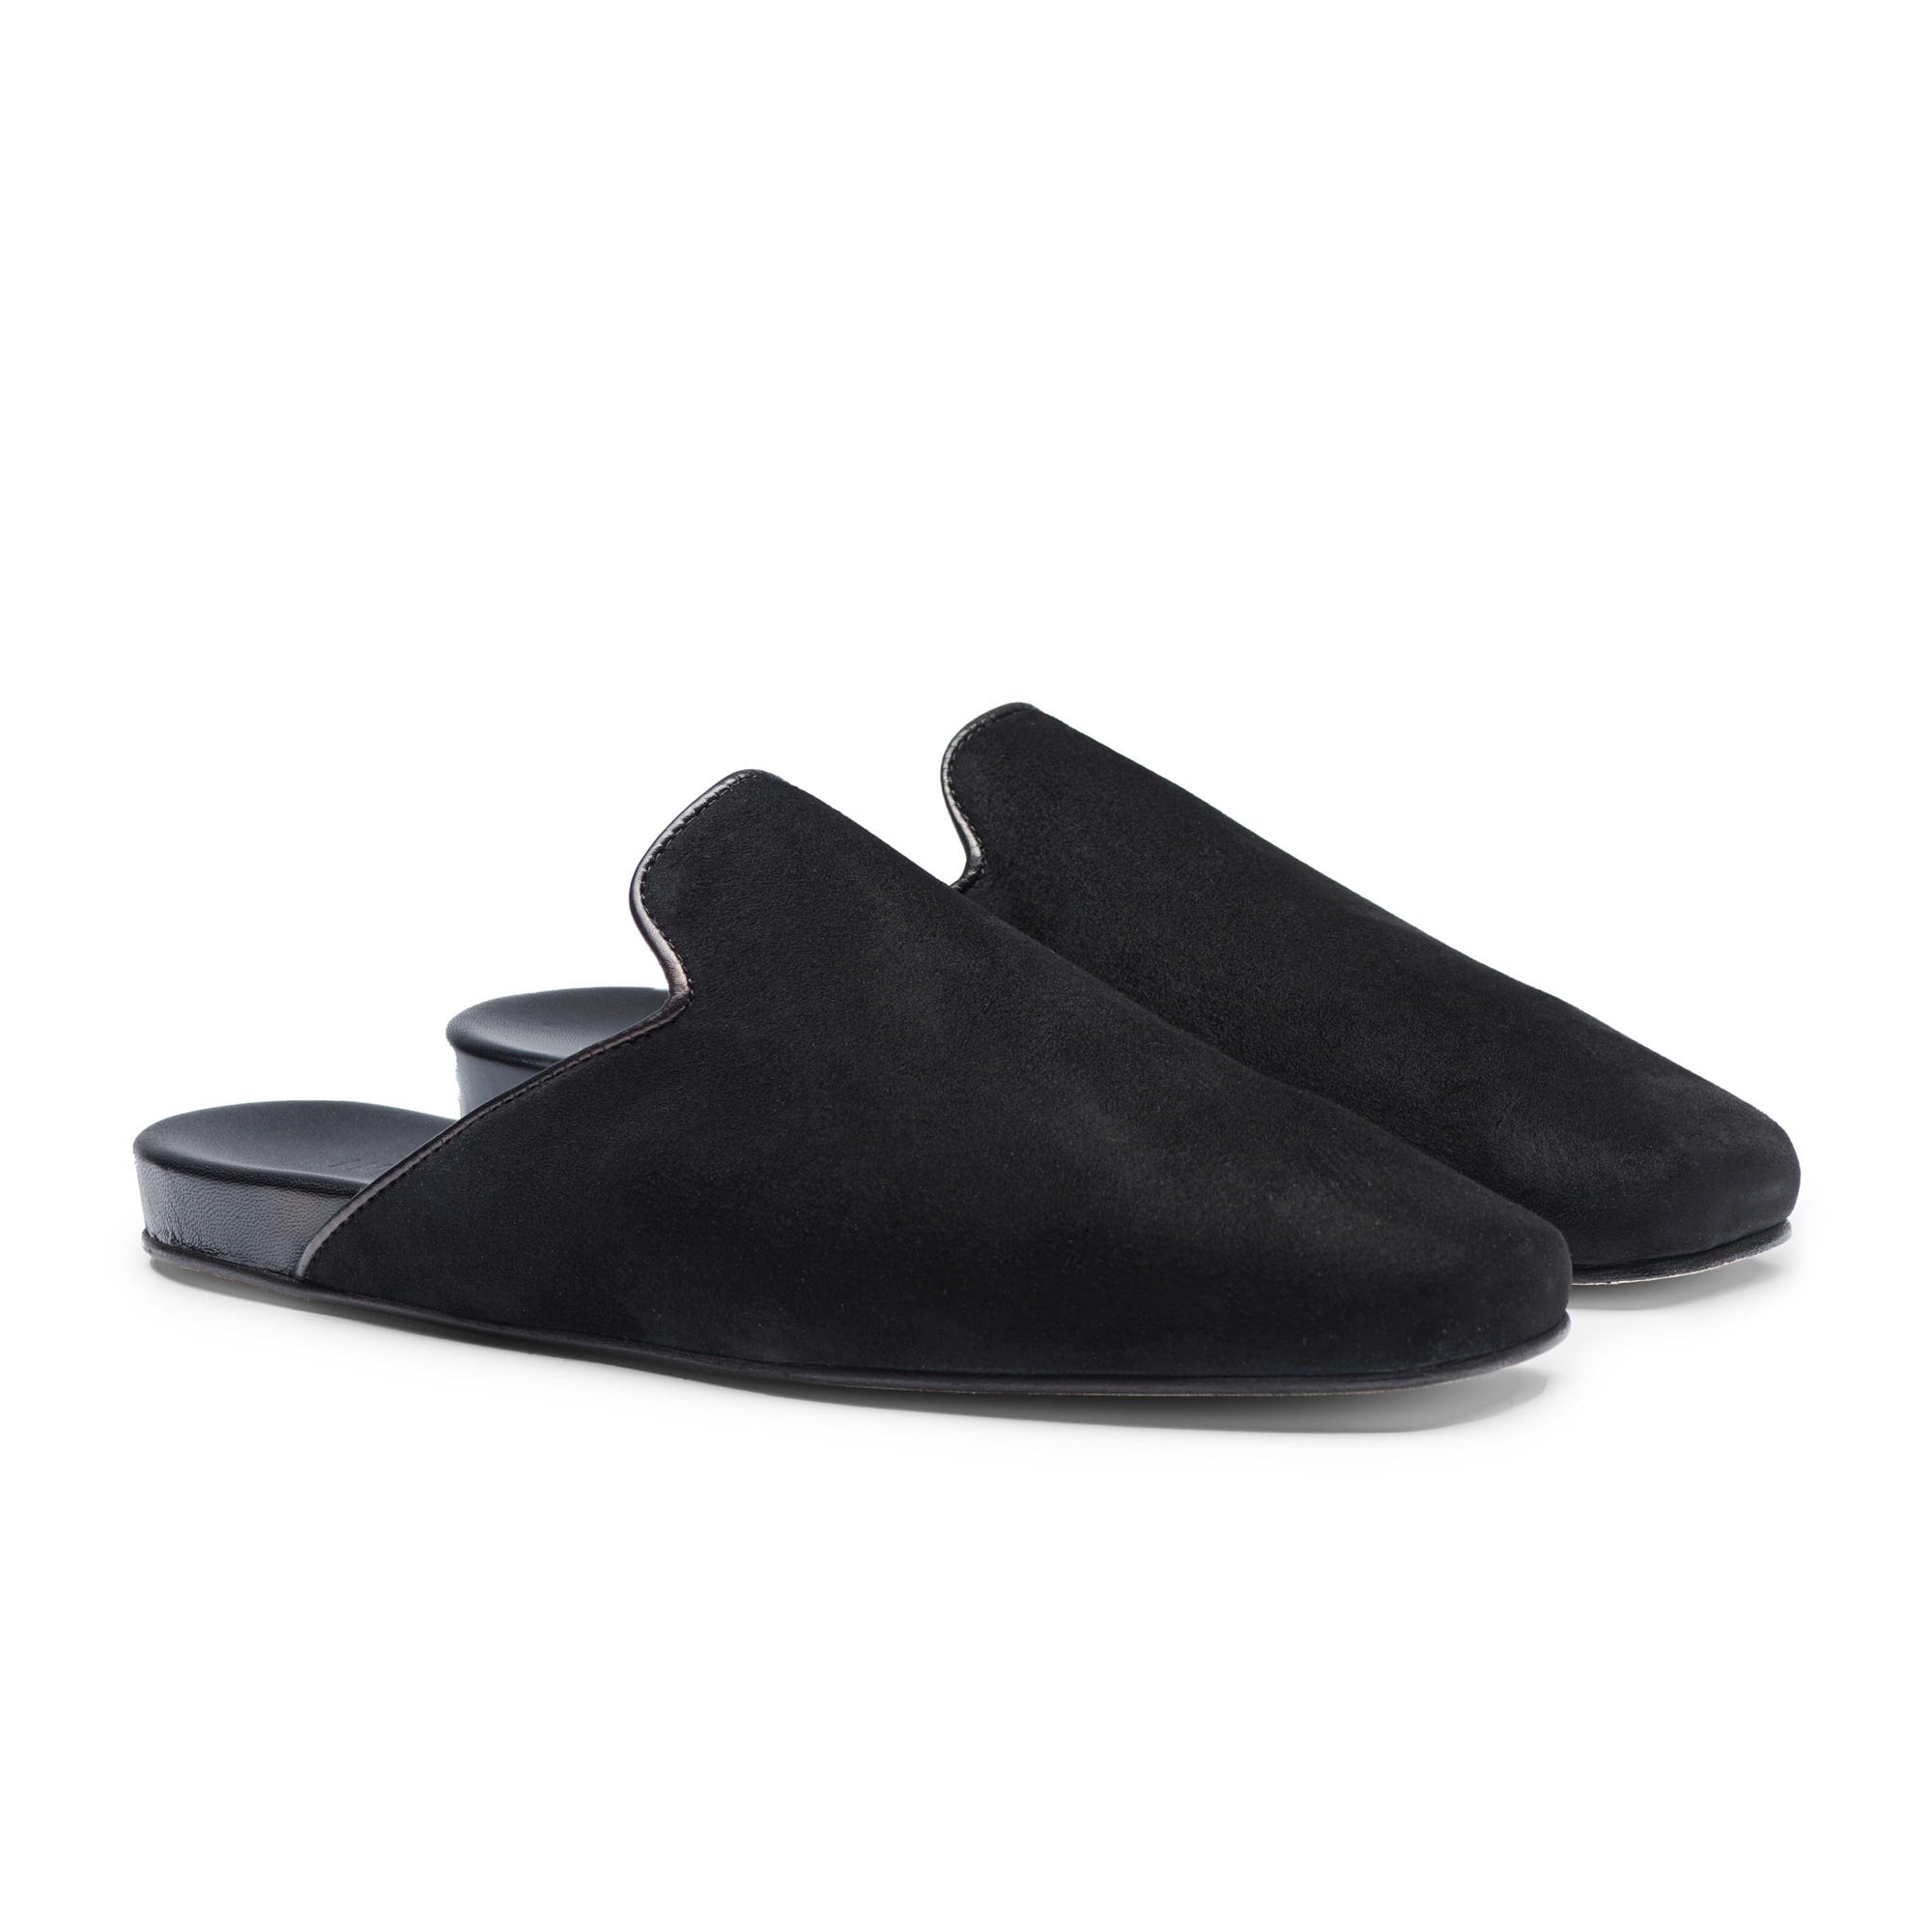 Inabo Women's Hilma Slipper in black suede and leather outer sole